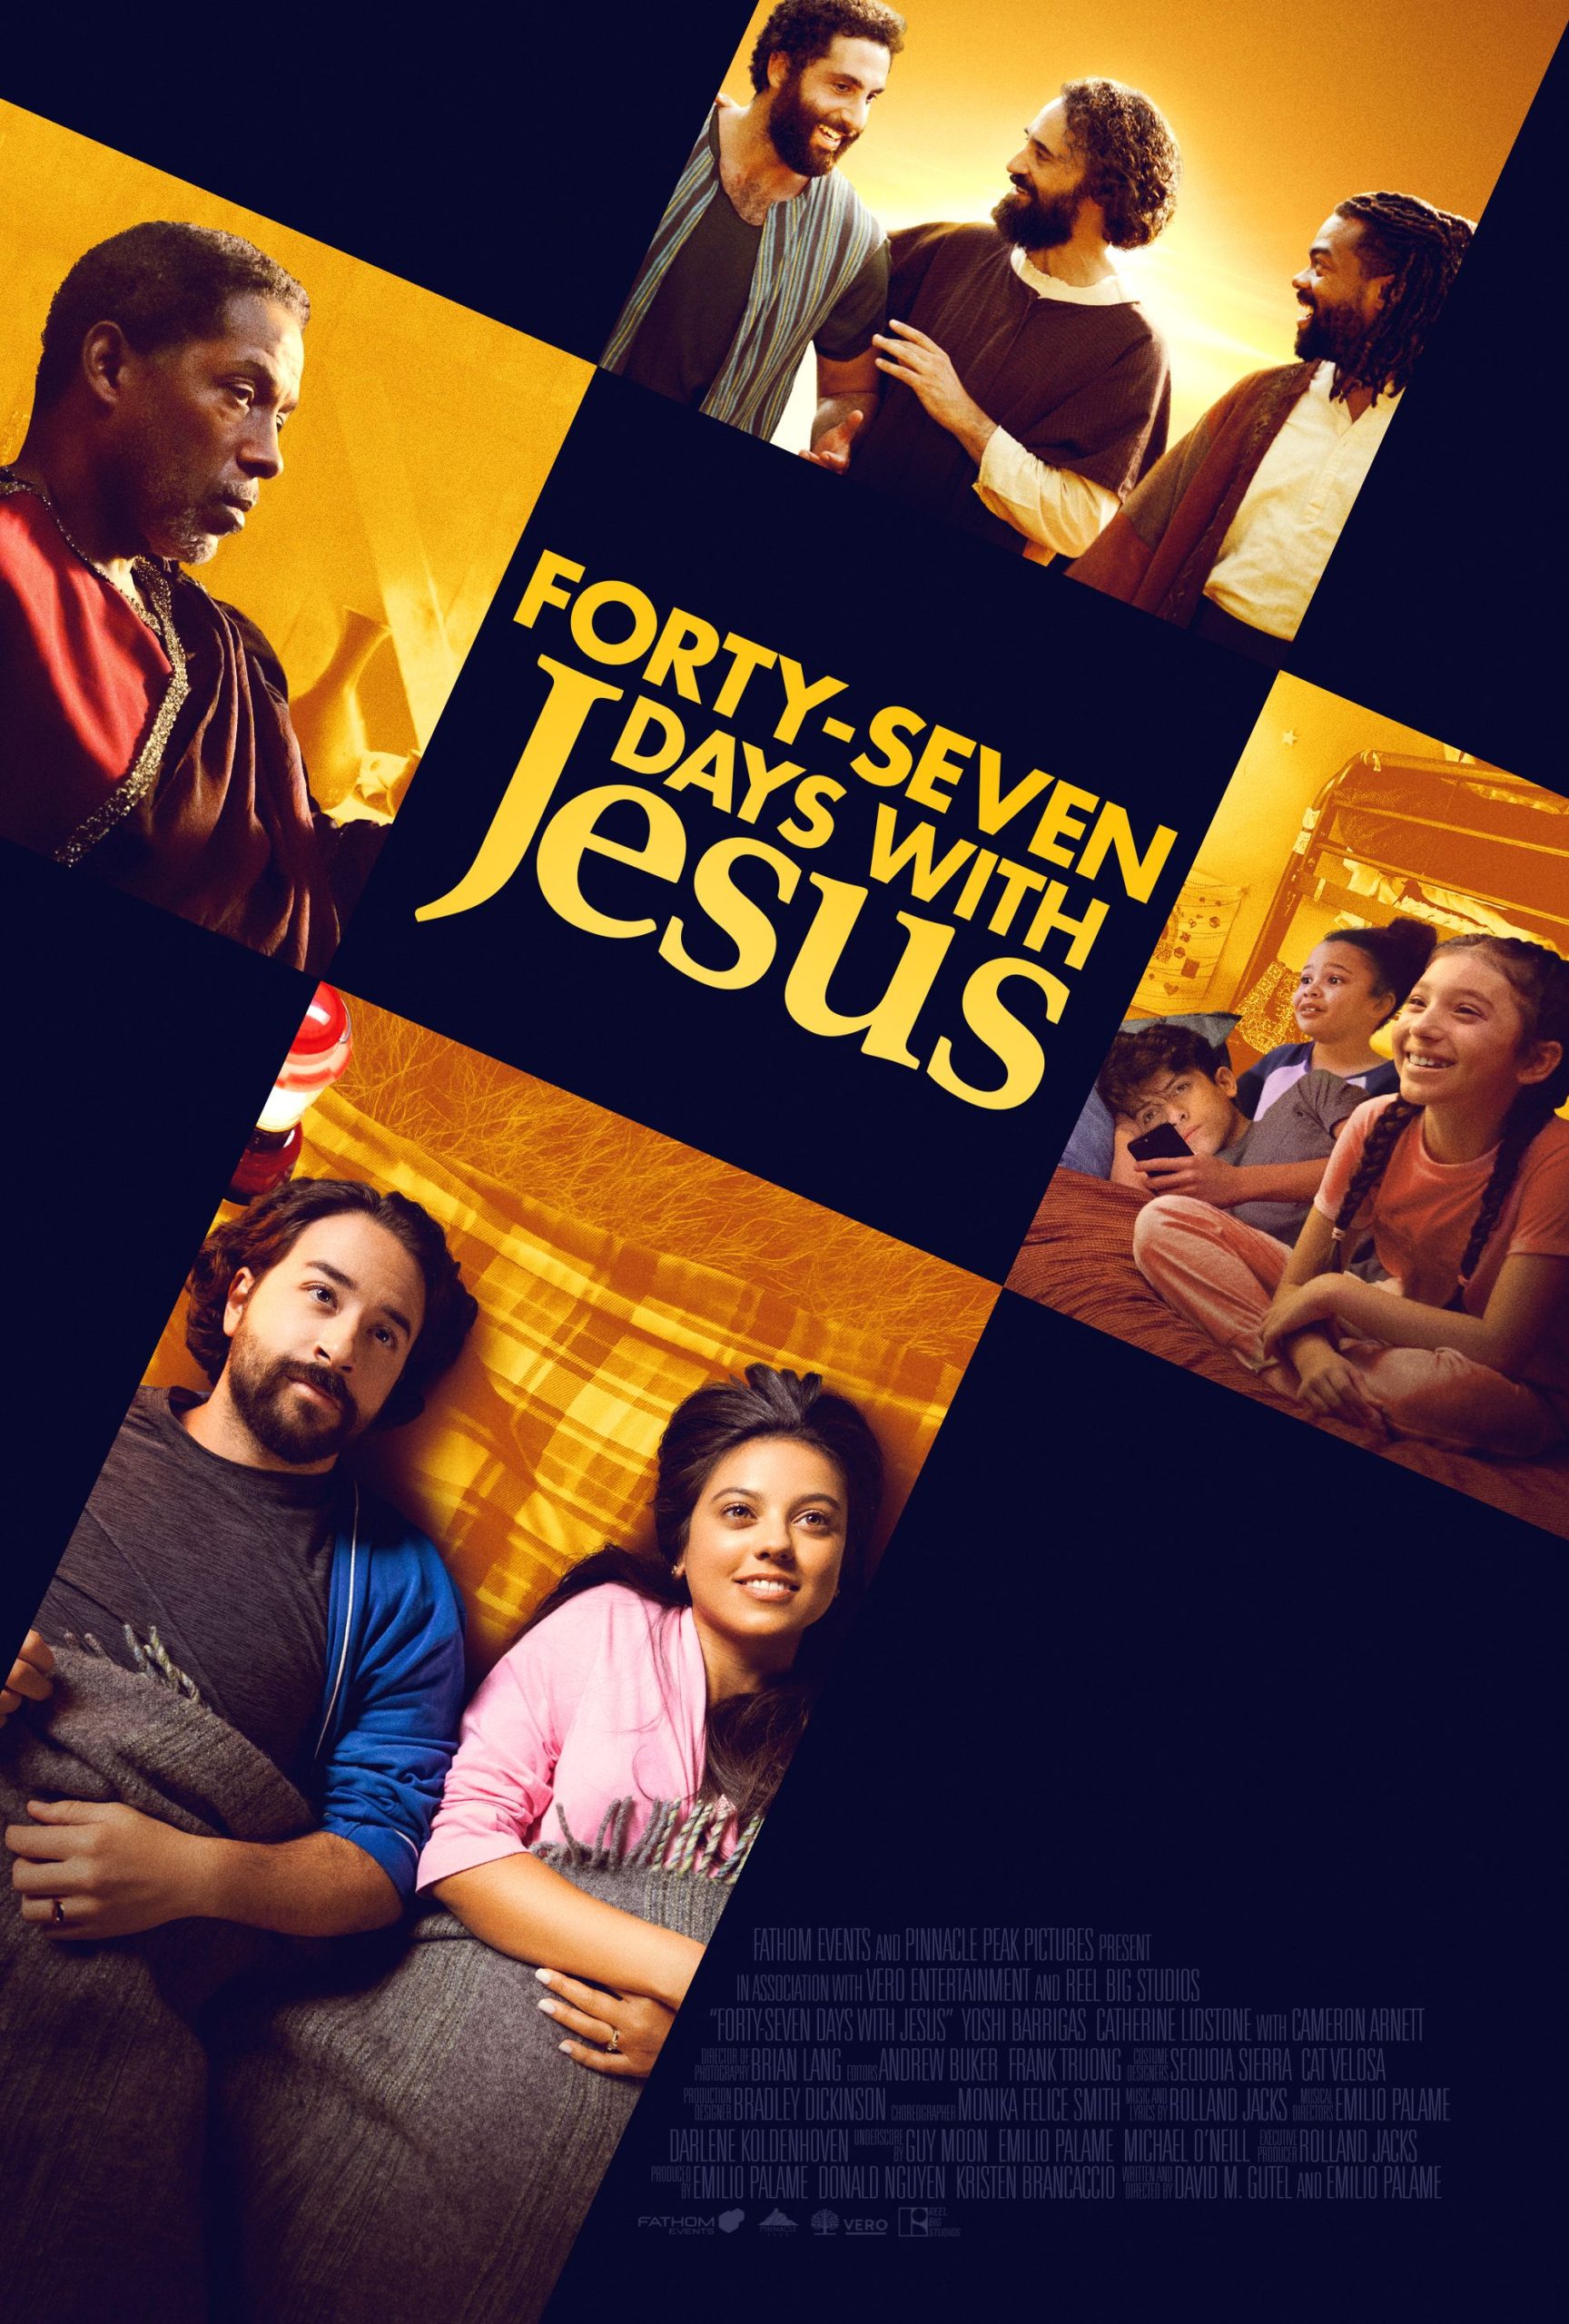 47 Days with Jesus in Theaters only in March 11,12,14